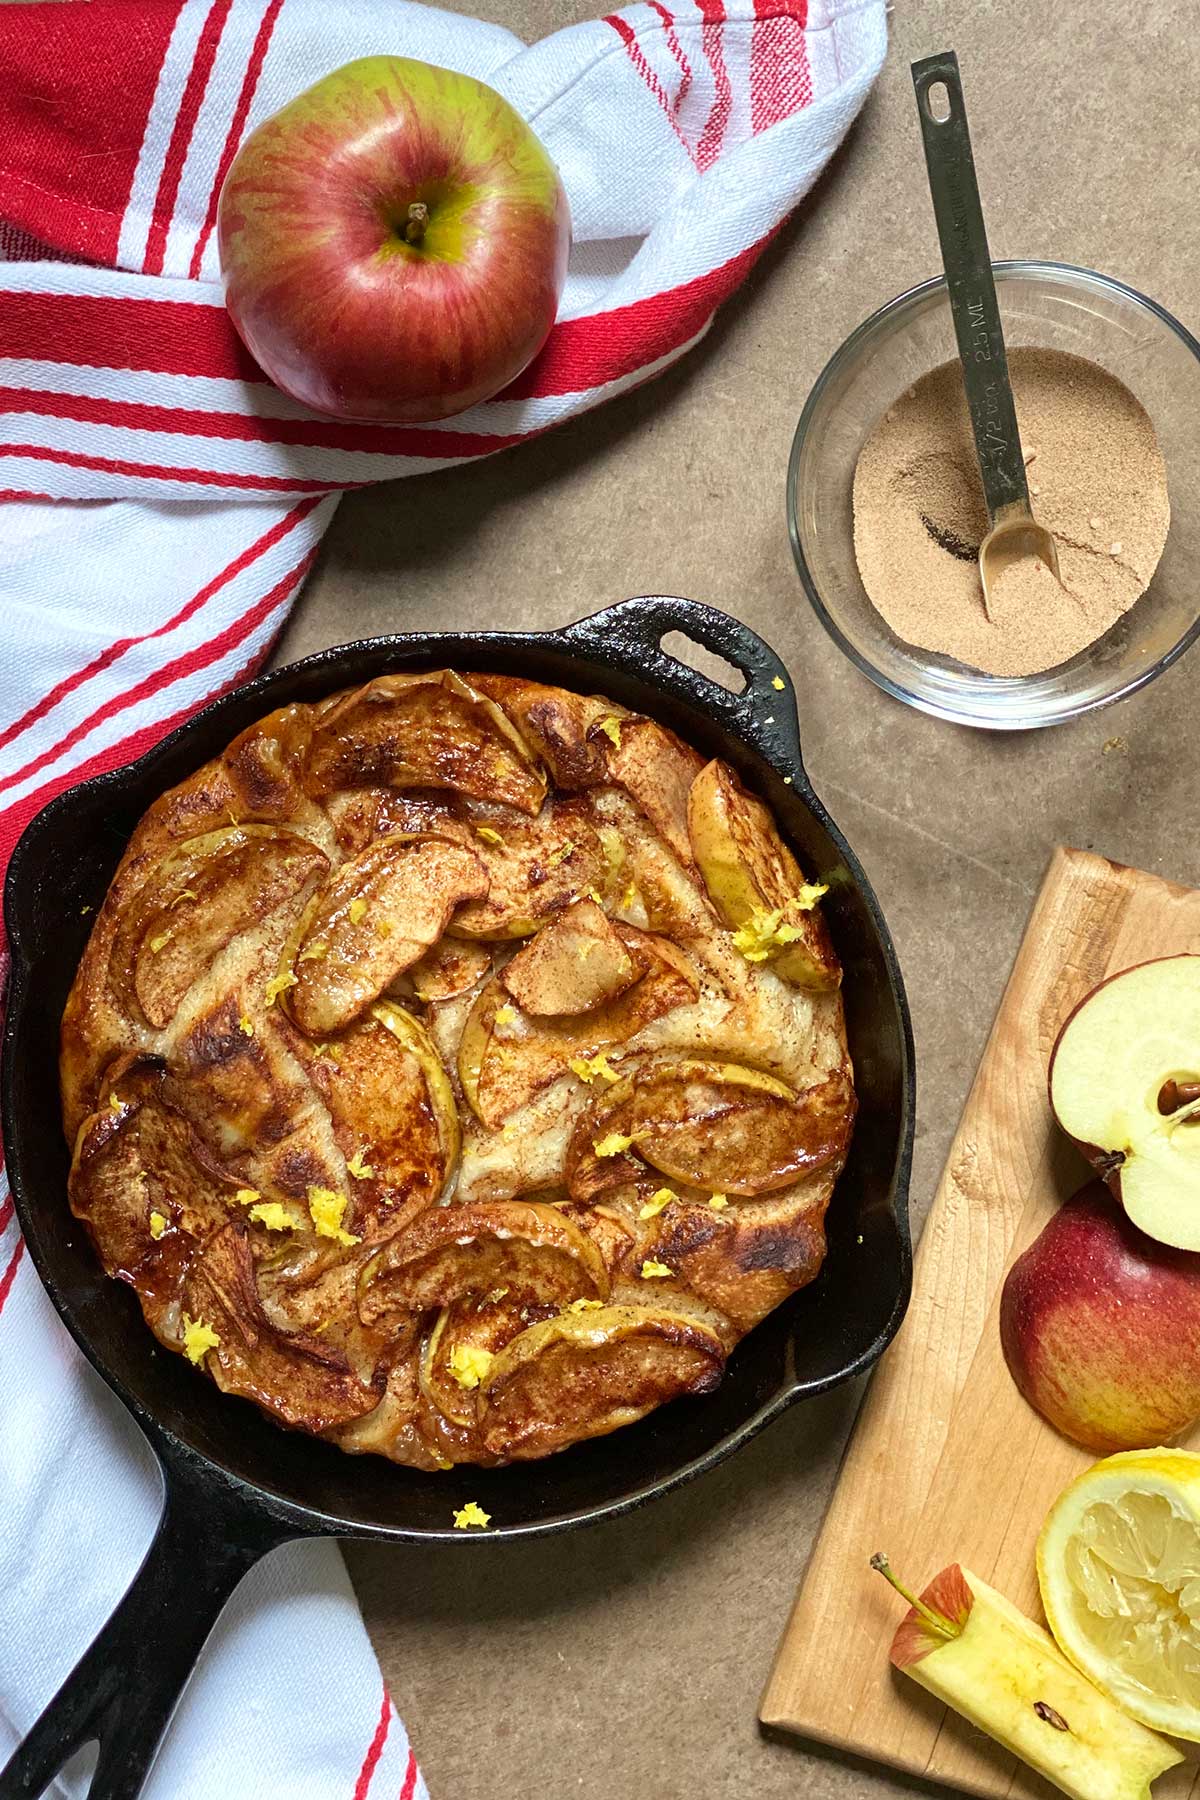 A cast iron pizza topped with sliced apples, cinnamon-sugar, and brown butter